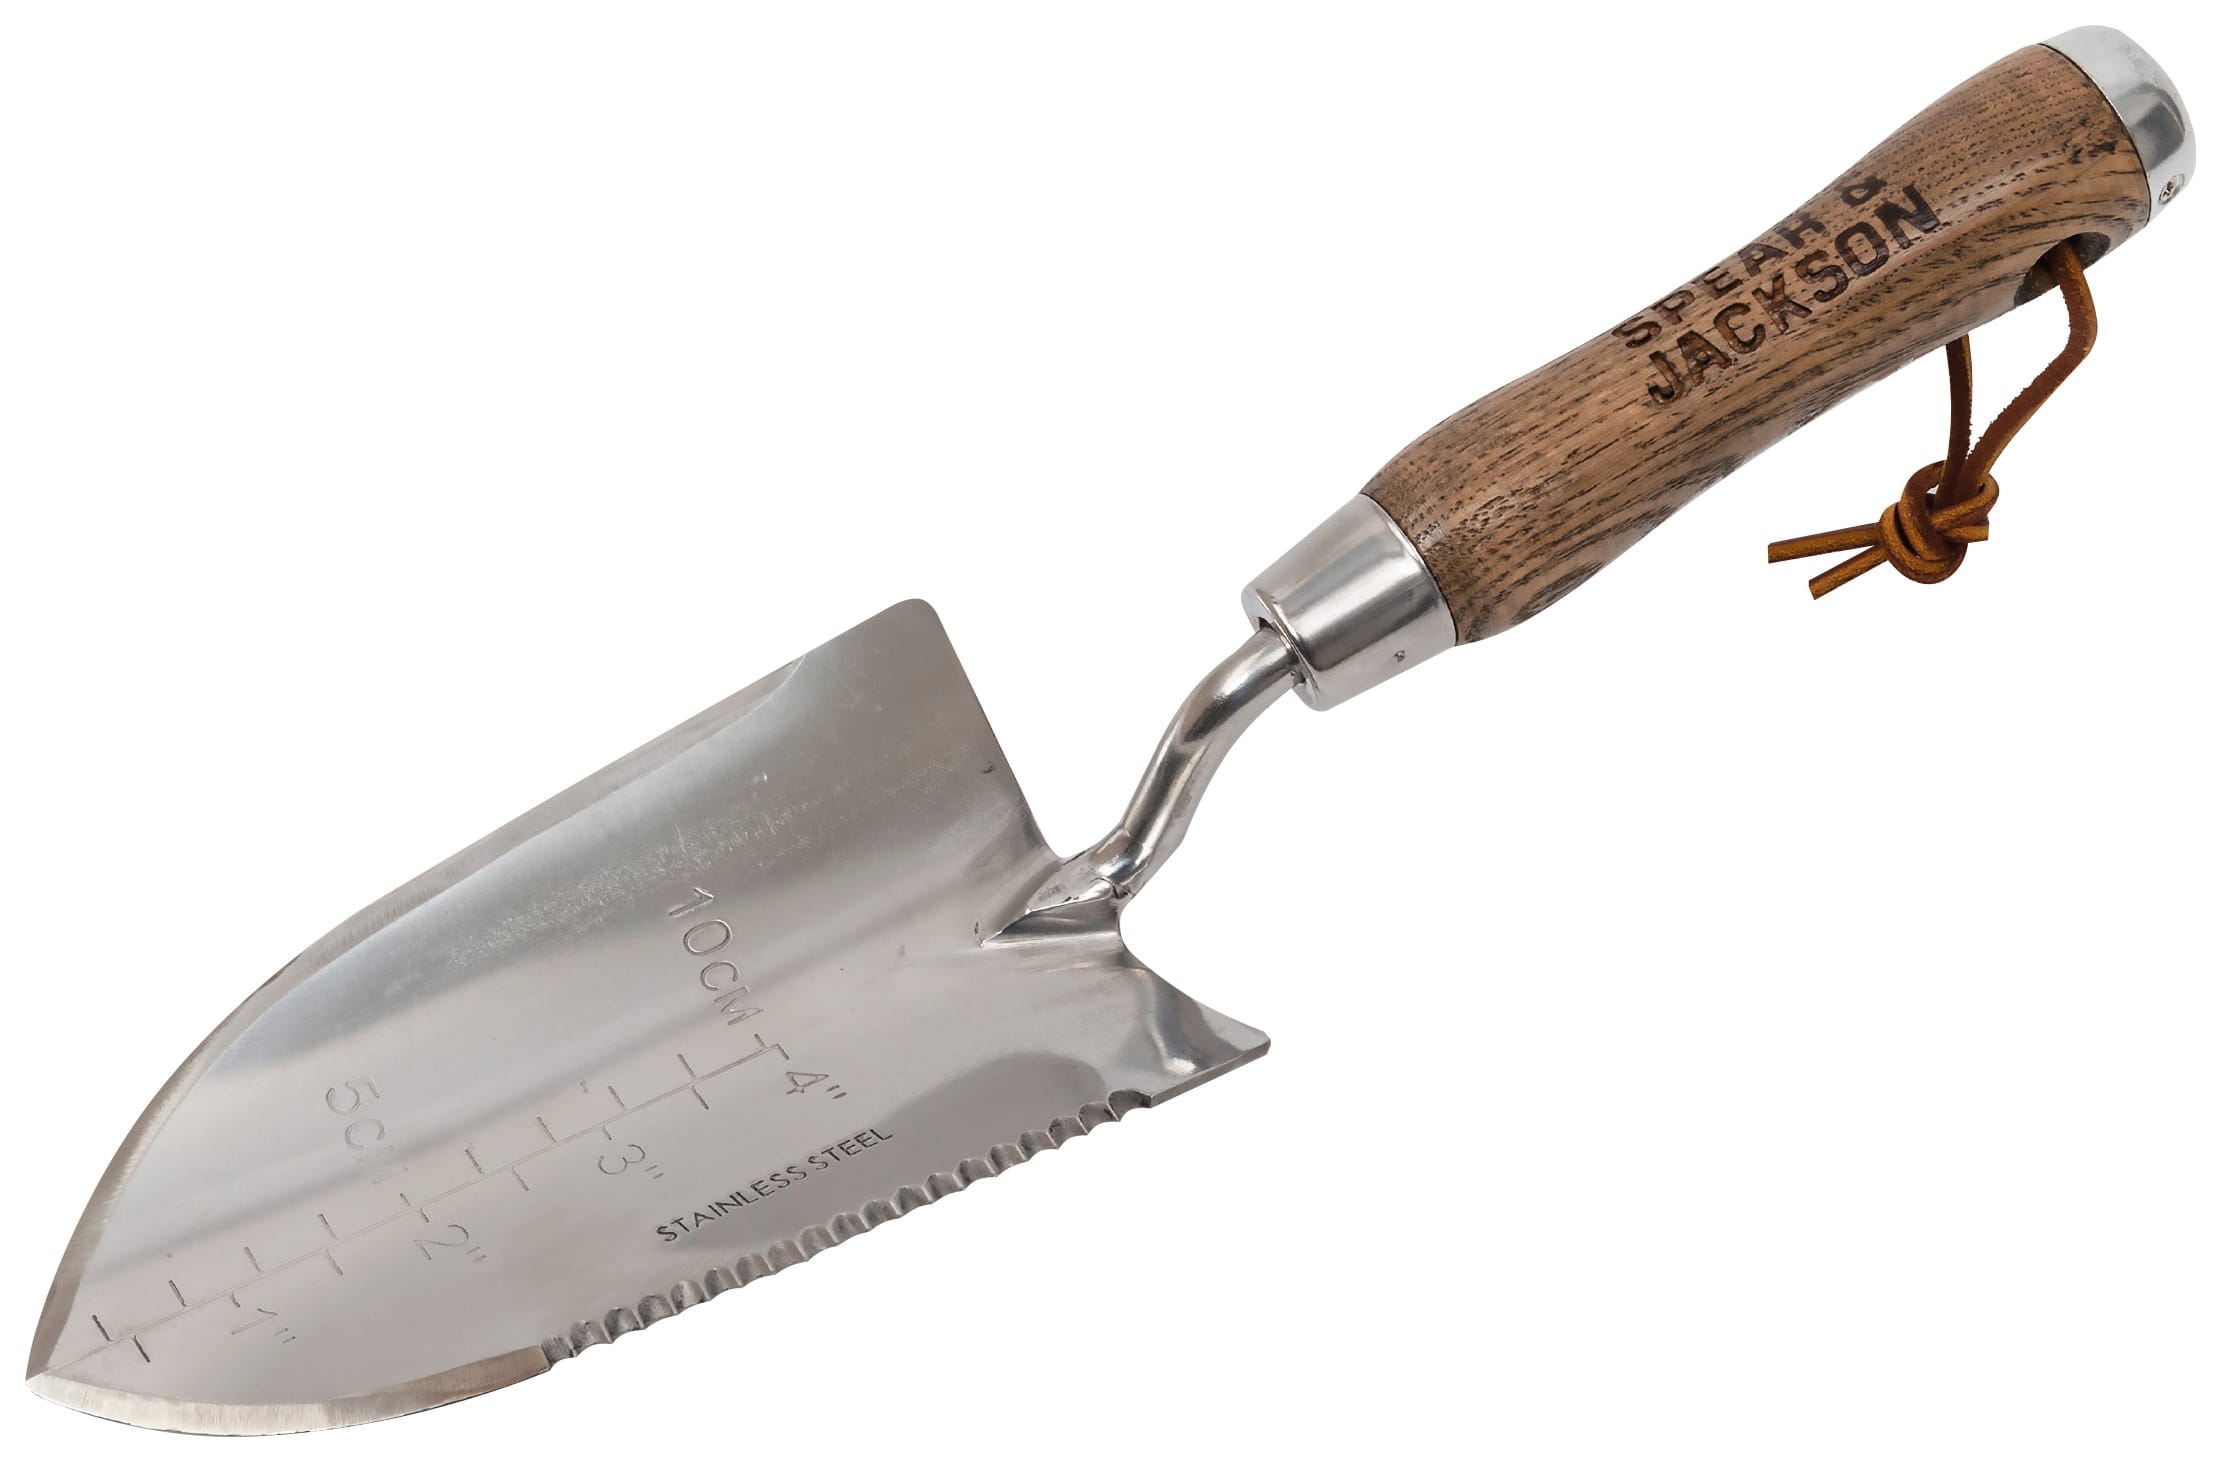 Spear & Jackson Traditional Stainless Versatility Trowel